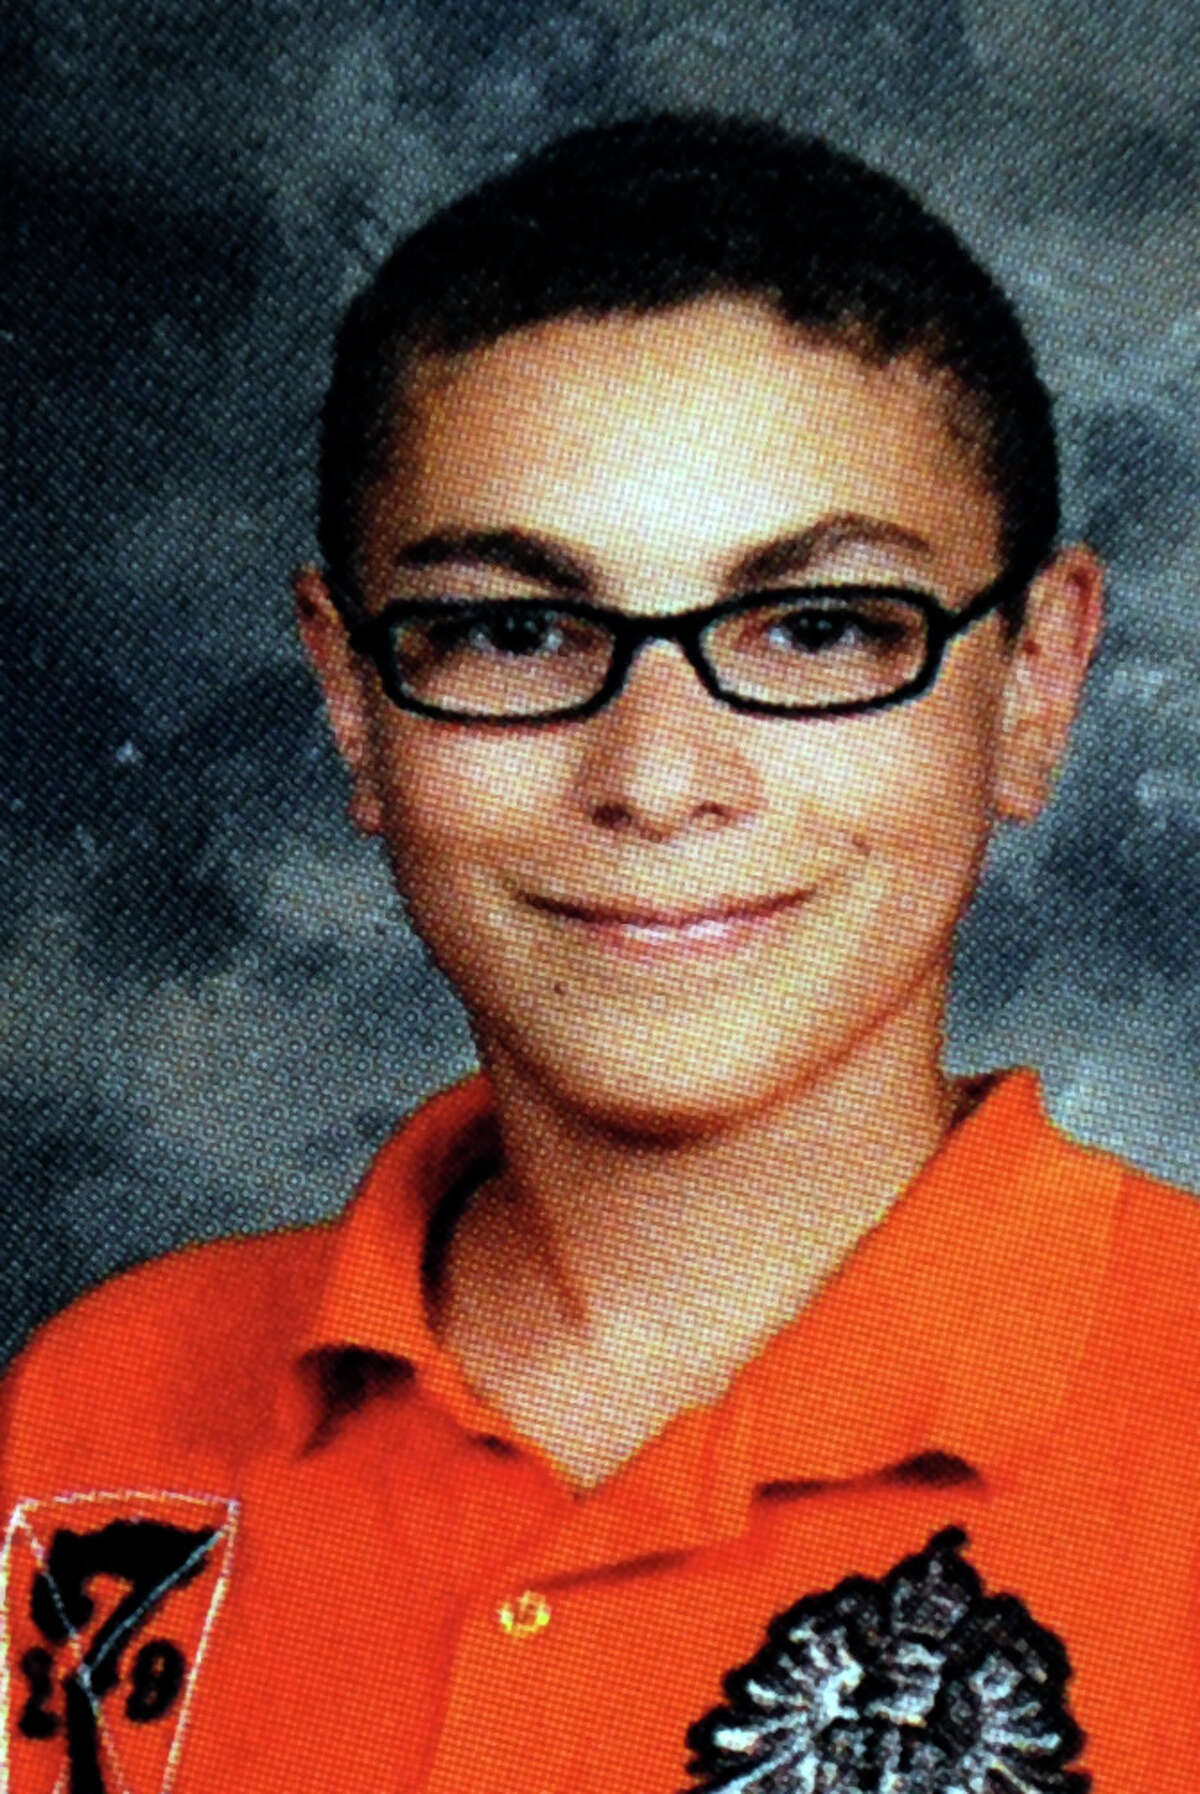 Tyler Giuliano as he appeared in the 2012 New Fairfield High School yearbook.